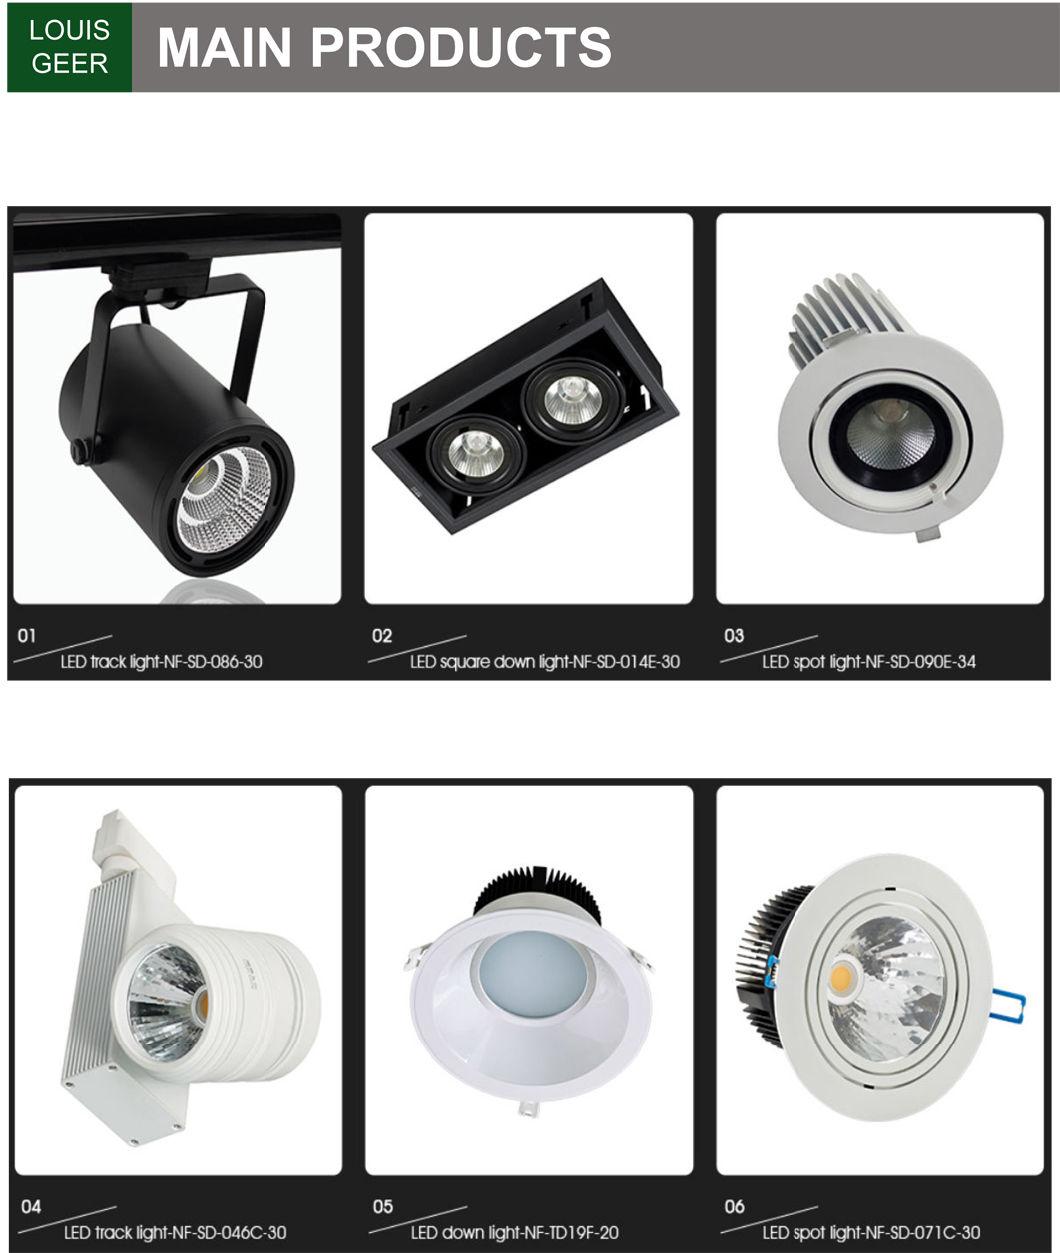 Adjustable CCT Indoor LED 10W Die-Casting Aluminum Housing LED Lamp Recessed LED Downlight for Office Club Hotel Hospital